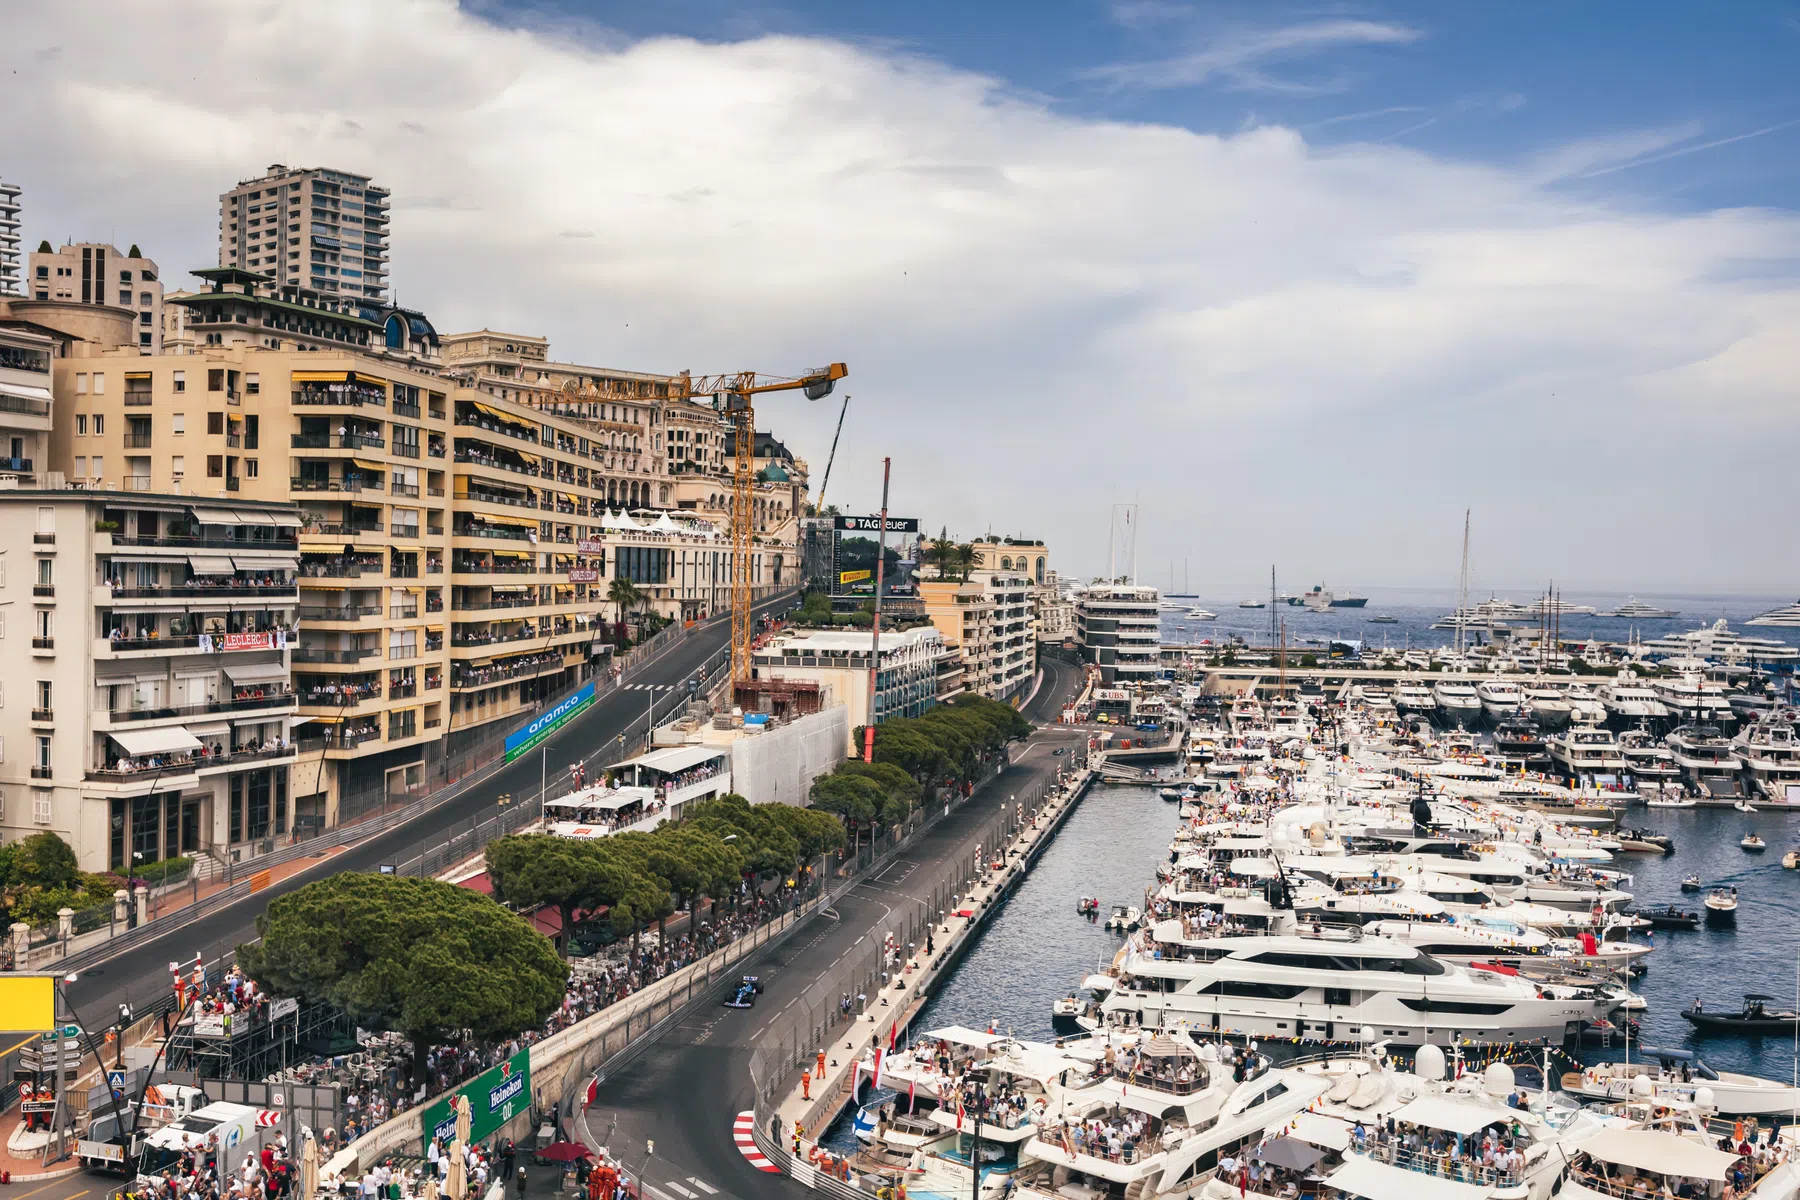 Why do F1 drivers live in Monaco?